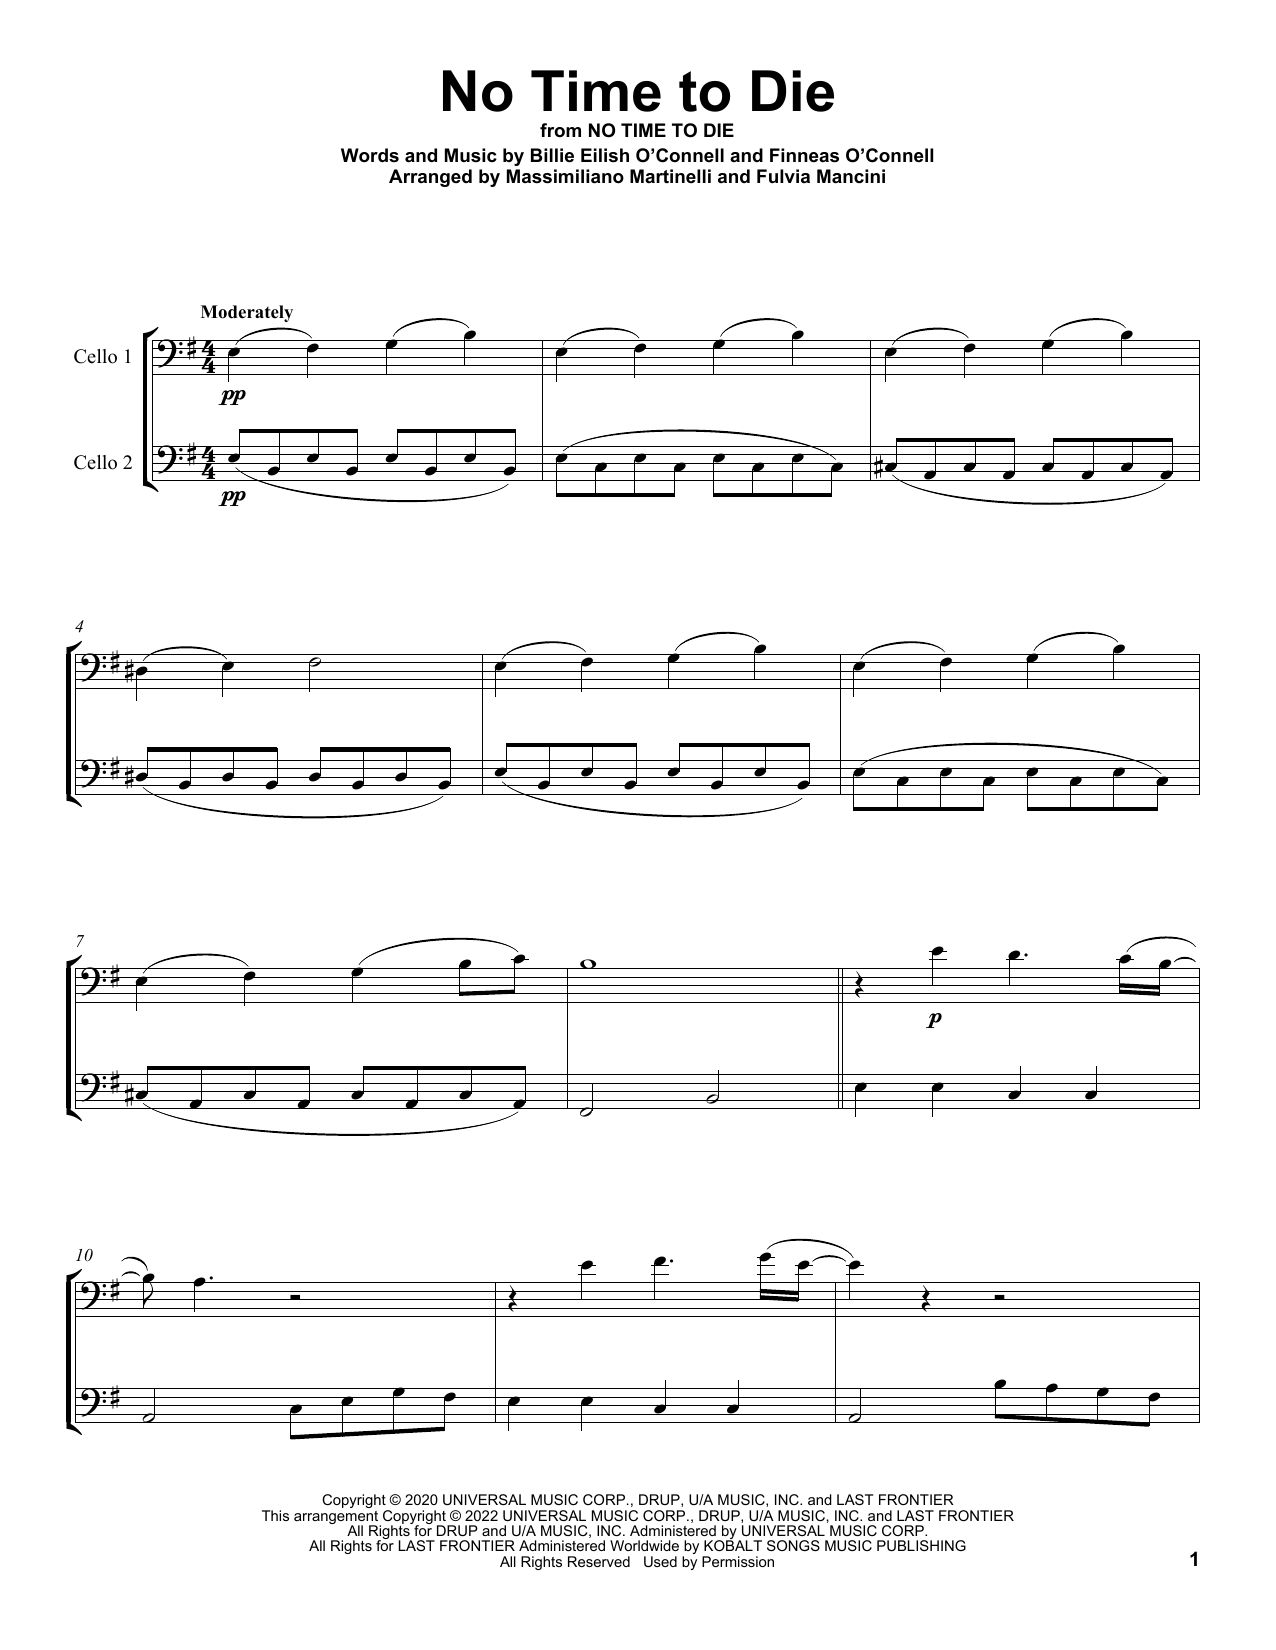 Download Mr & Mrs Cello No Time To Die (from No Time To Die) Sheet Music